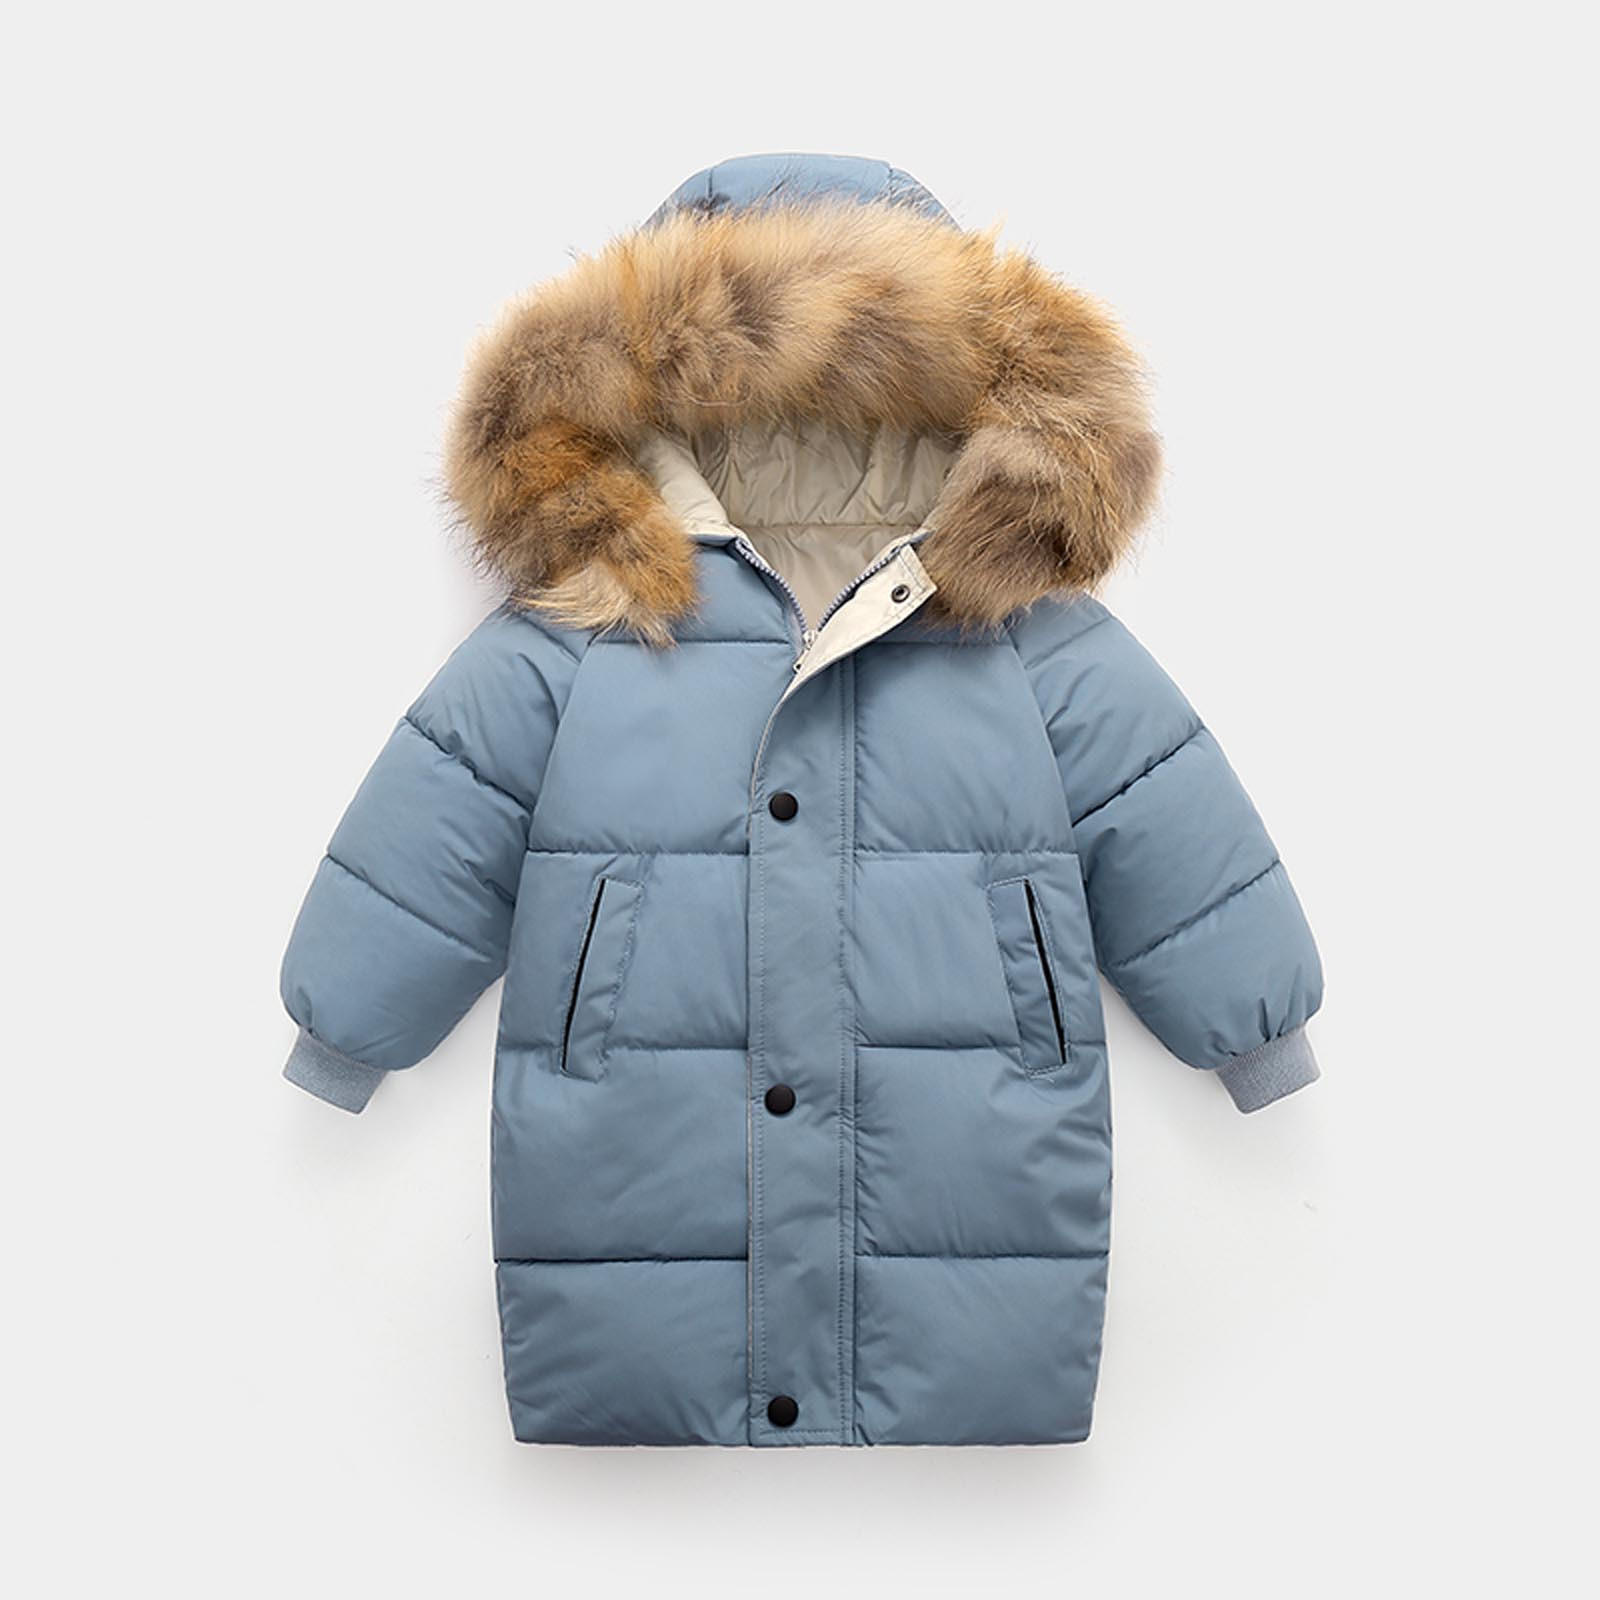 Verugu Toddler Baby Girls Boys Winter Coat Thicken Warm Jackets Baby Hooded Snow Outwear Coat Kids Thicken Warm Down Coat Winter Hooded Long Cotton Down Jackets Outerwears Blue, 12-24 Months - image 2 of 3